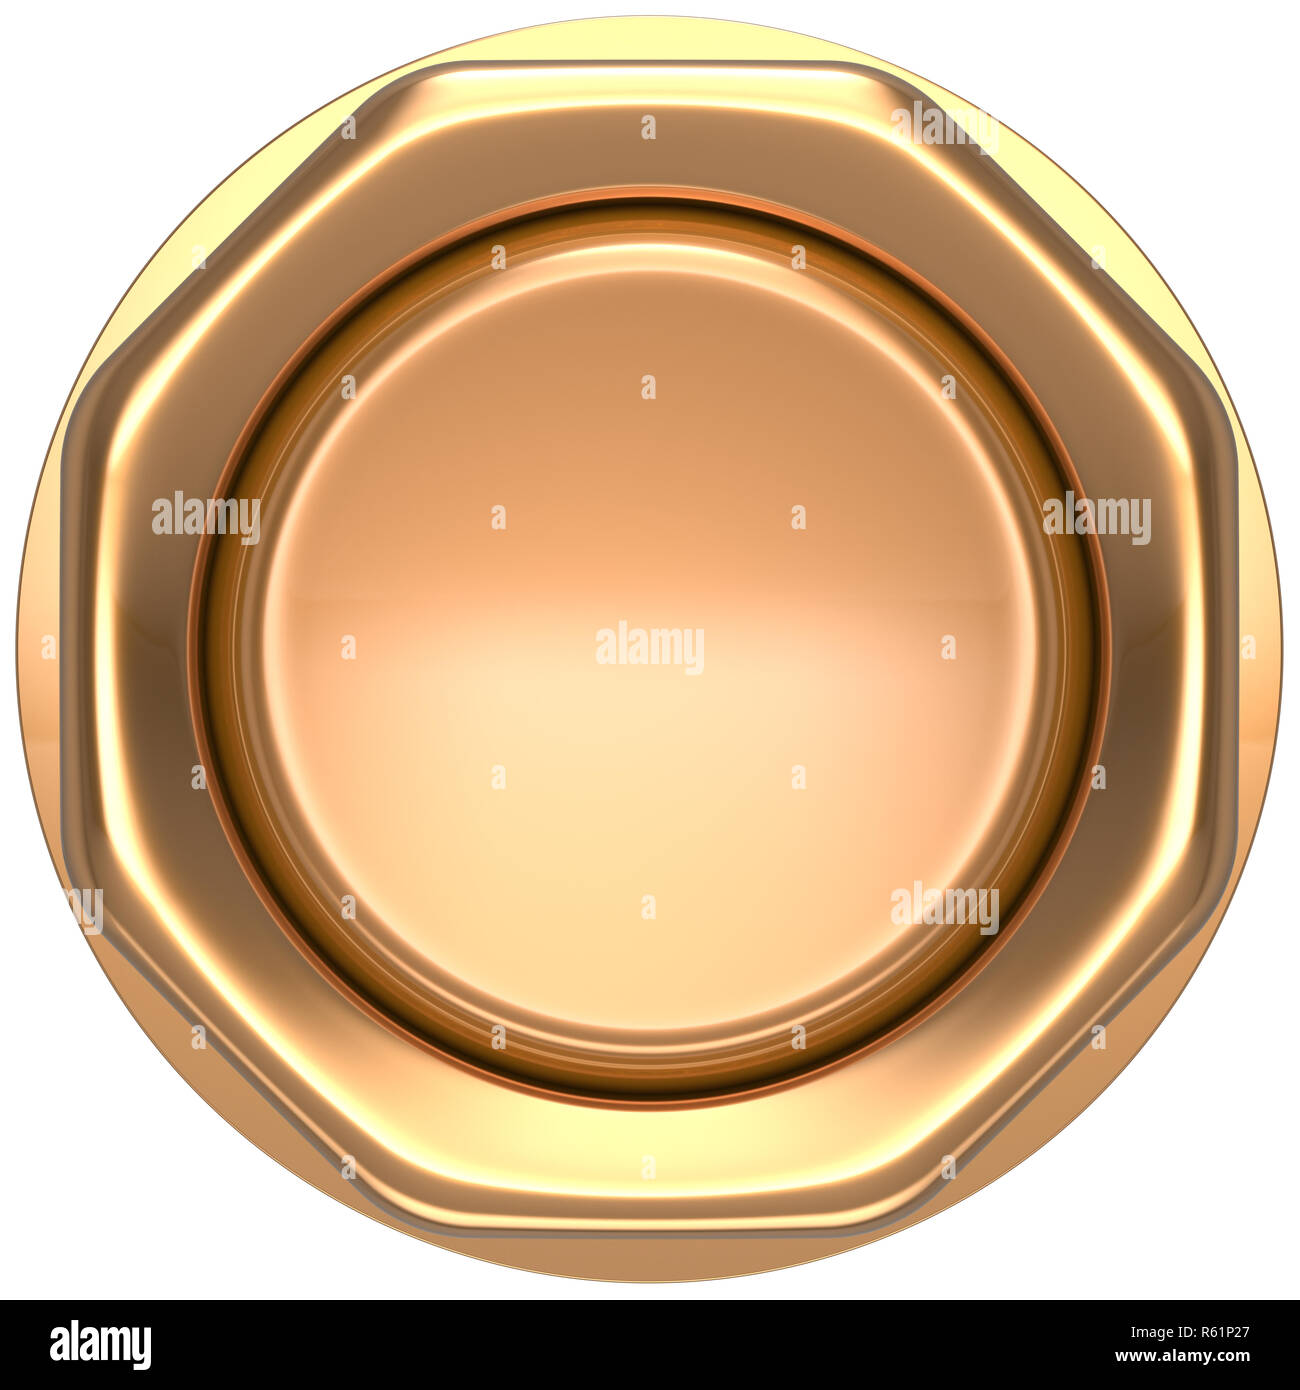 Button gold push down activate luck casino power switch start turn on off  action ignition electric design element metallic shiny blank golden yellow  Stock Photo - Alamy